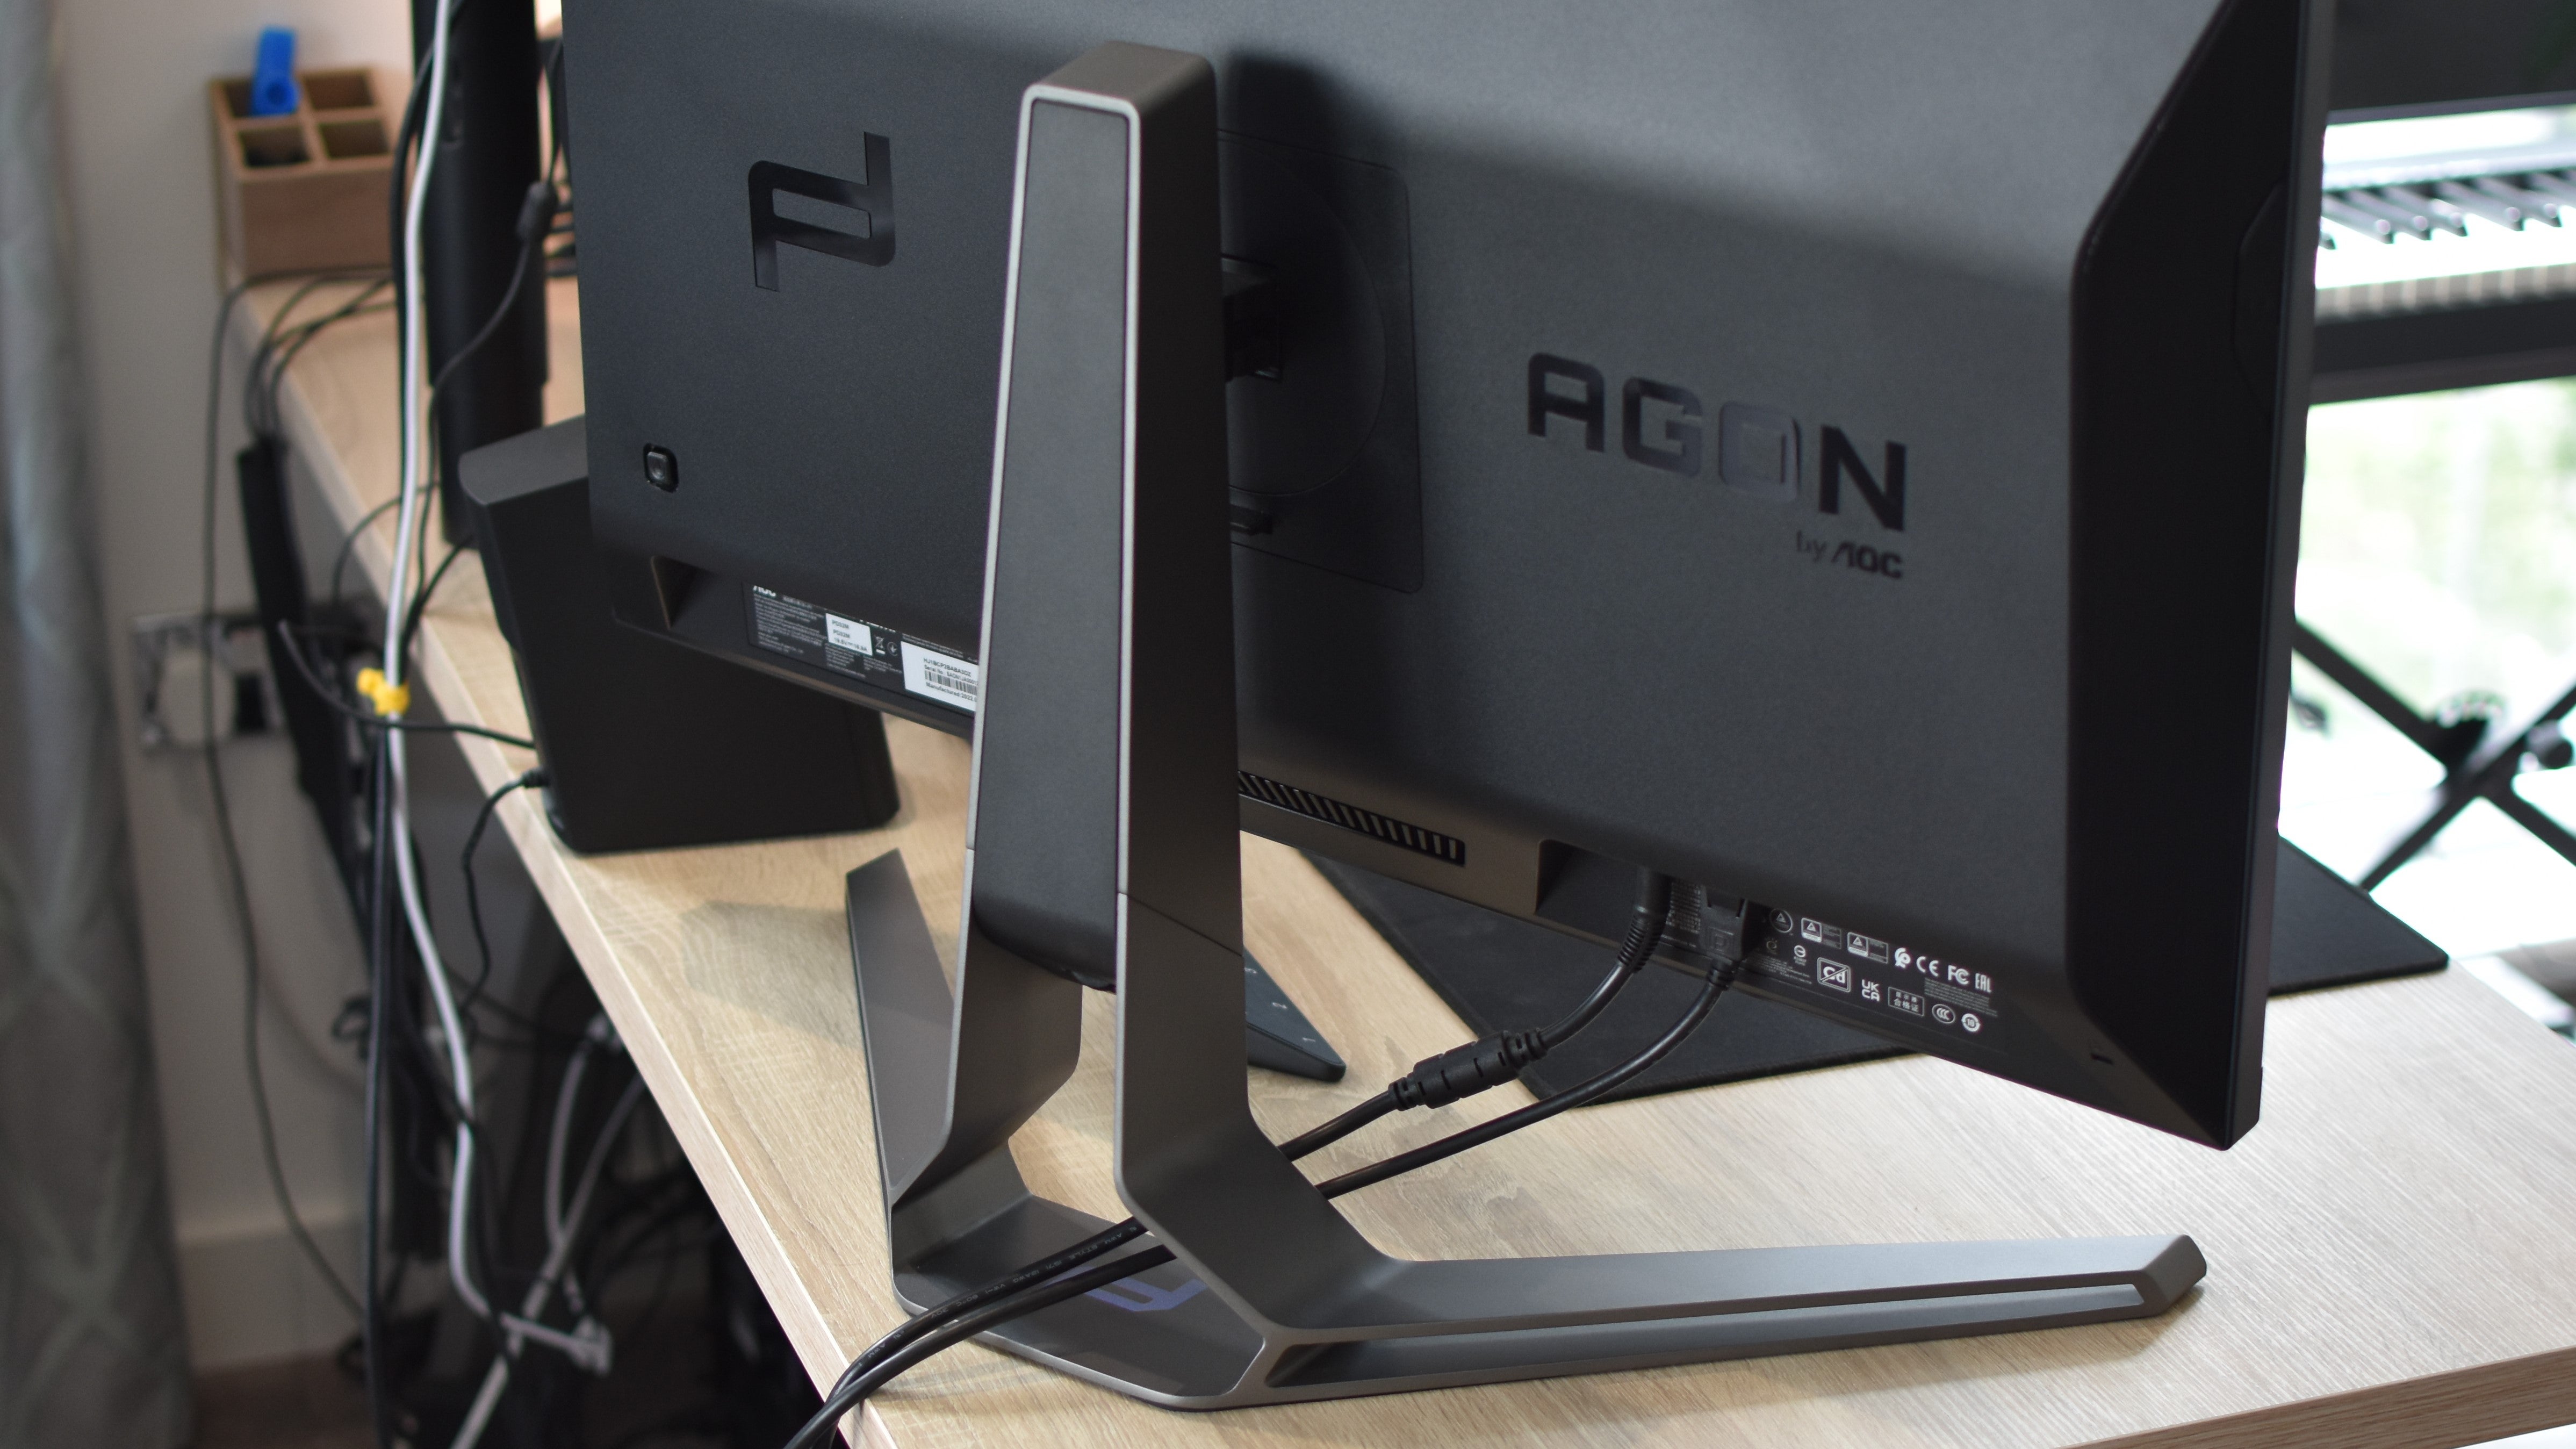 A rear view of the metal stand on the Porsche Design AOC Agon Pro PD32M gaming monitor.